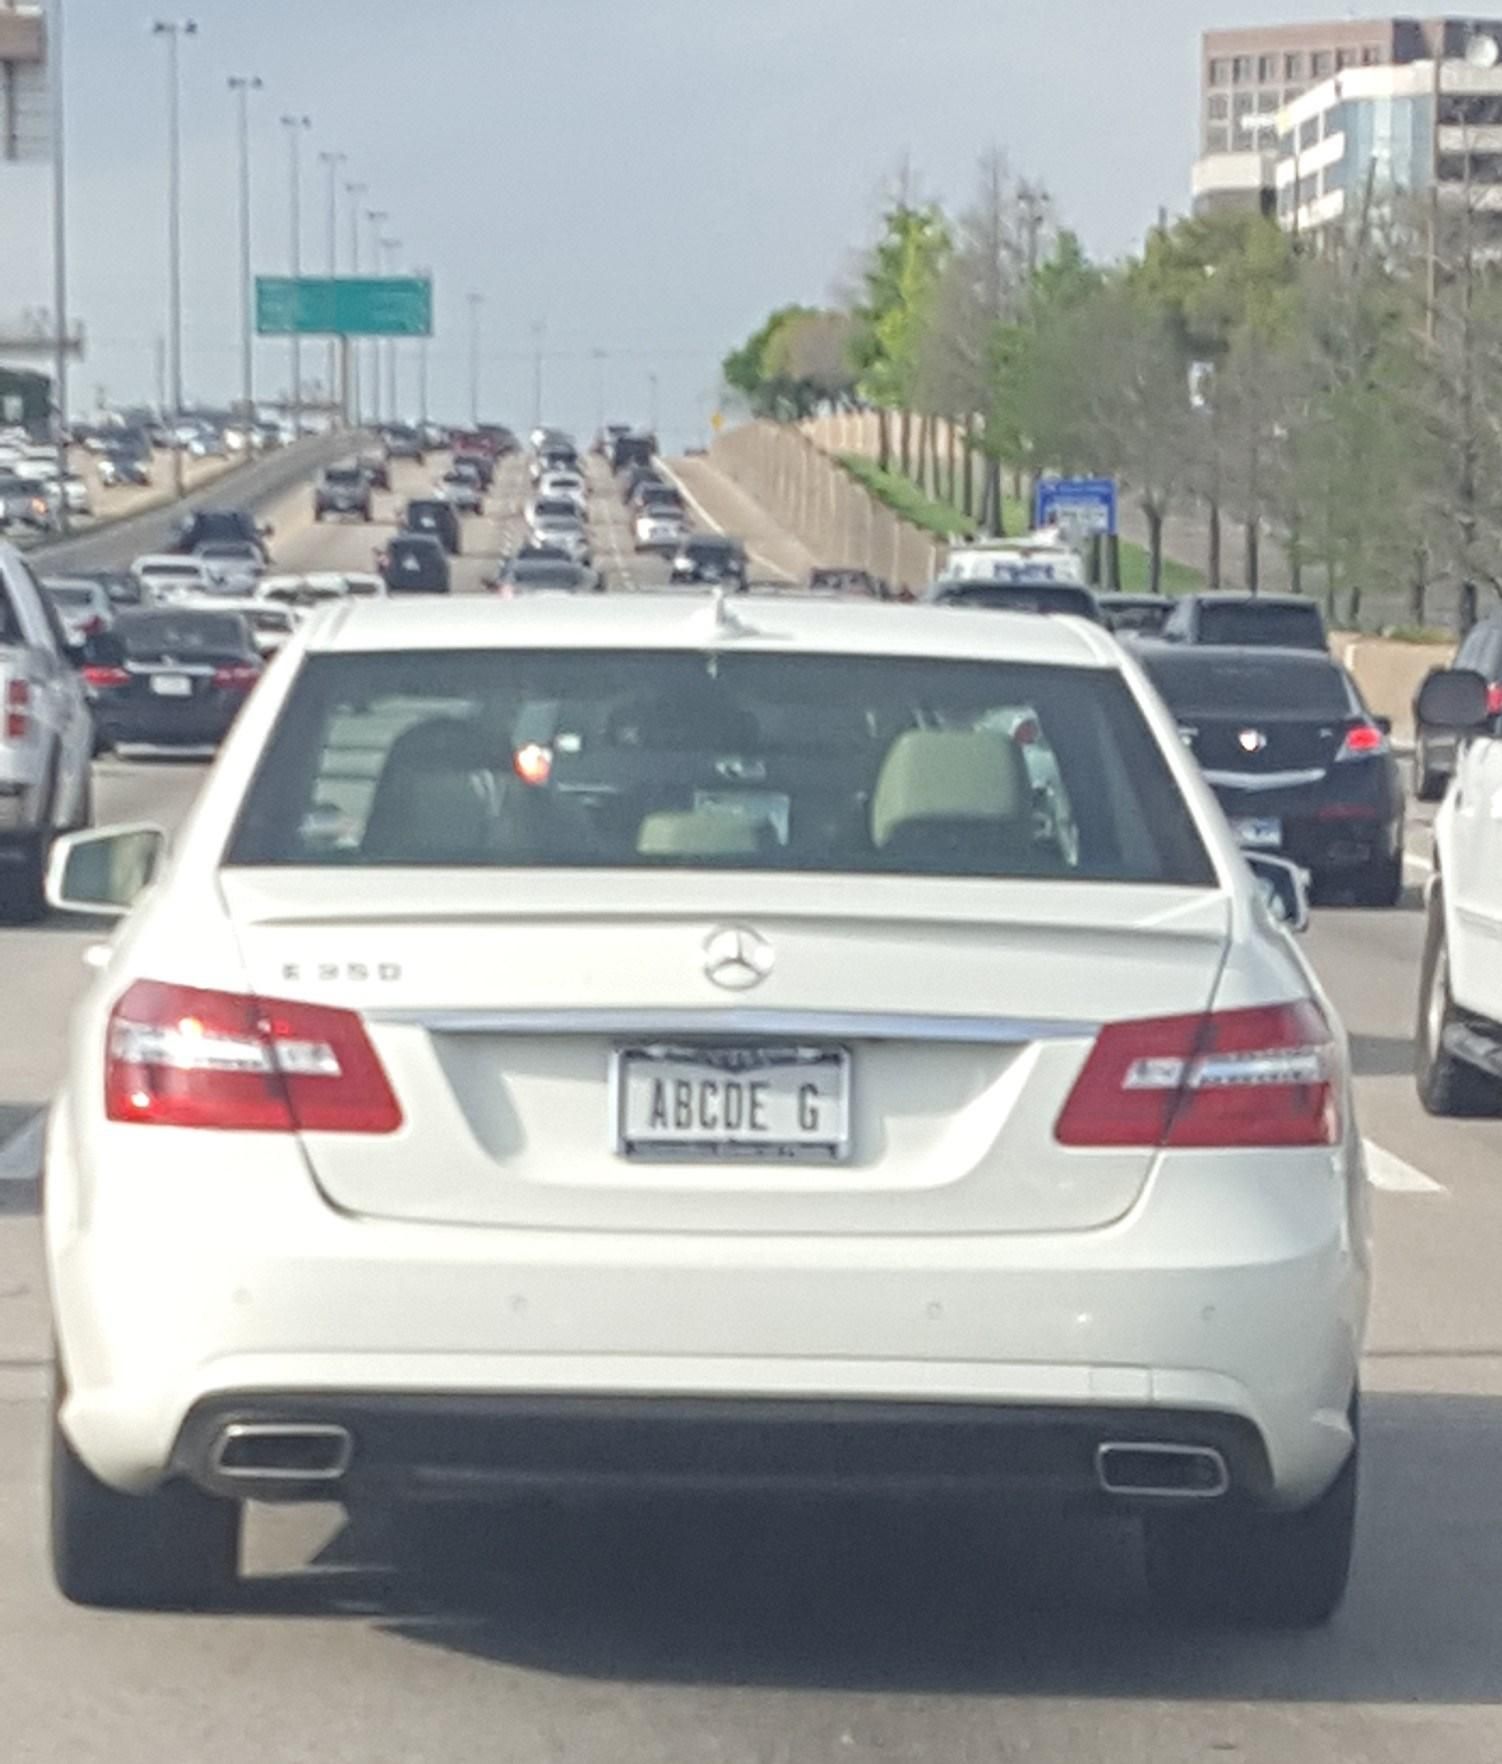 I applaud this lady who literally doesn't give an F in Dallas!